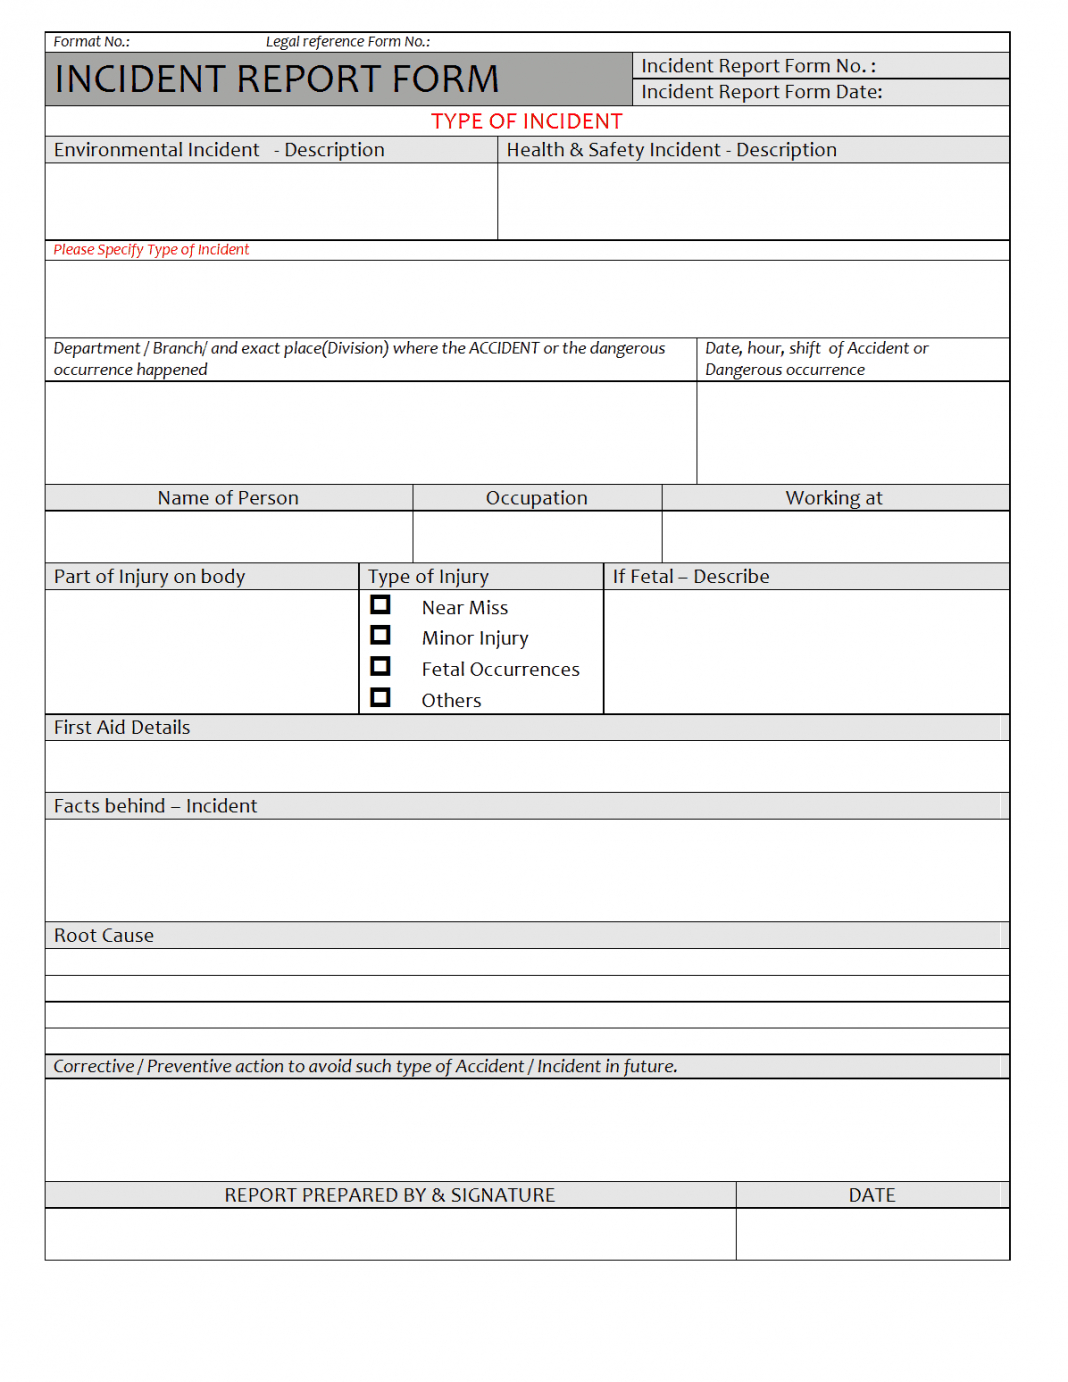 Sample Monthly Health And Safety Report Format Annual Throughout Monthly Health And Safety Report Template